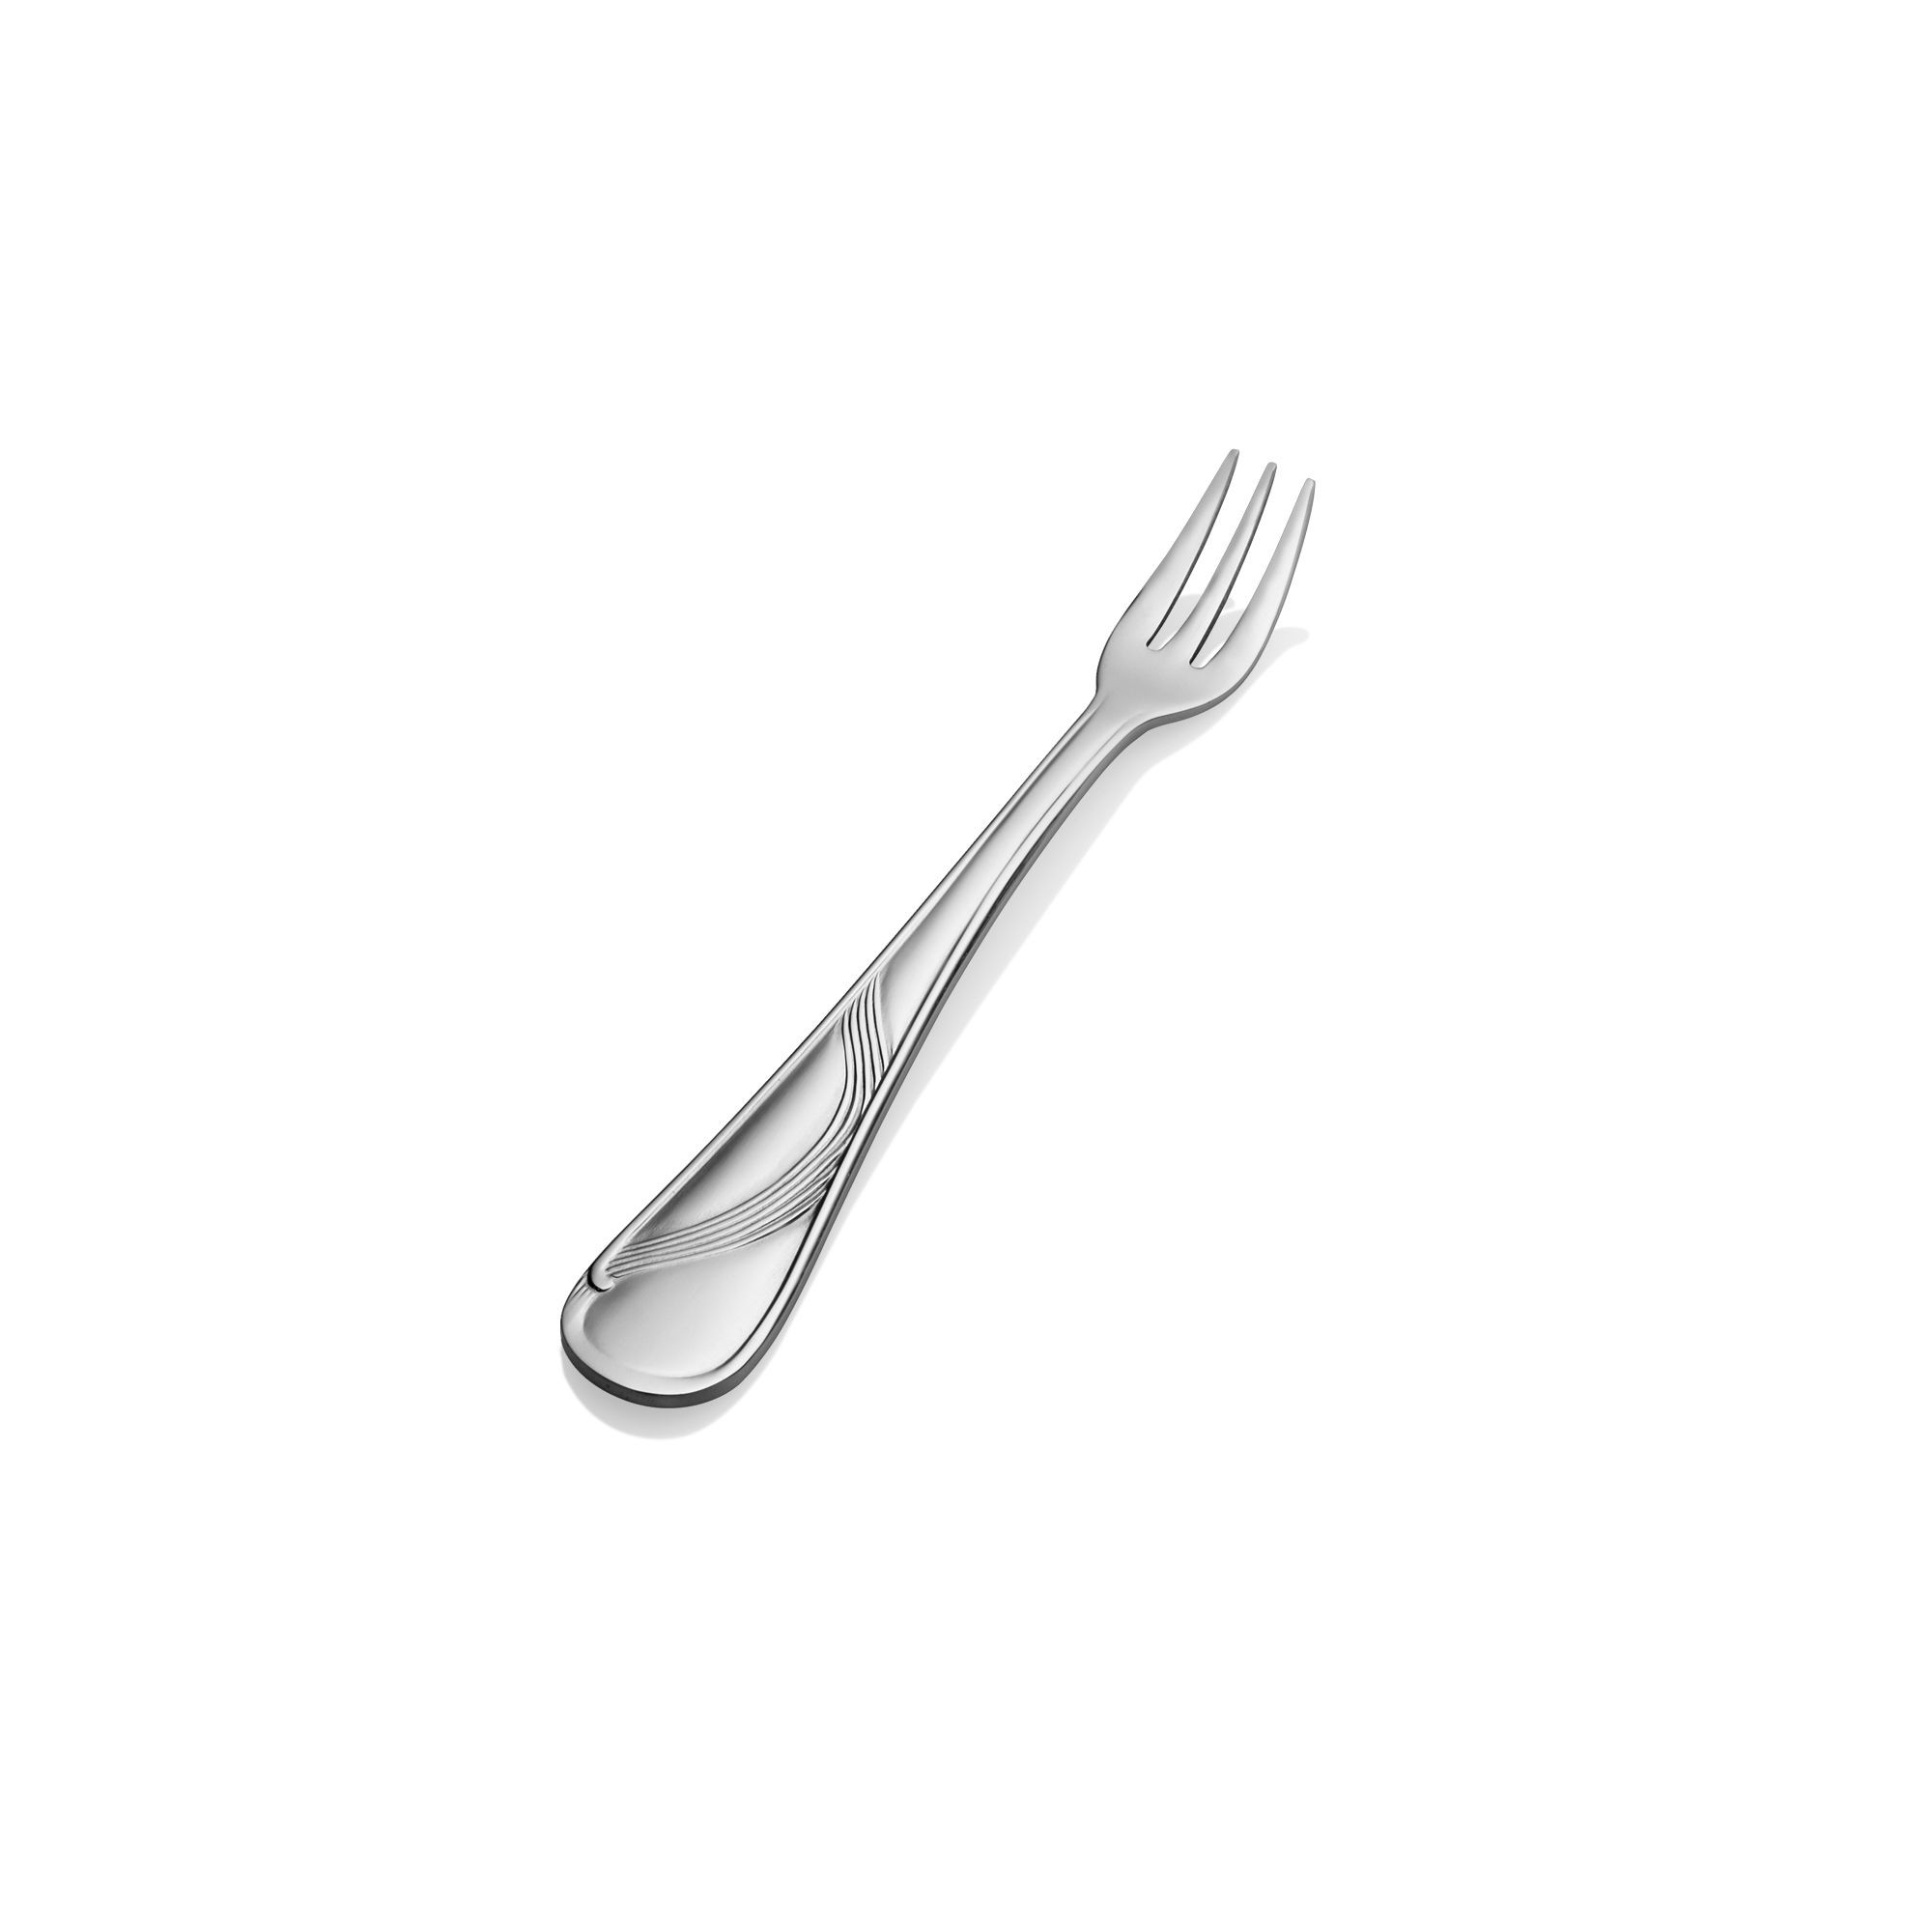 Bon Chef S2208 Wave 18/8 Stainless Steel Oyster Fork